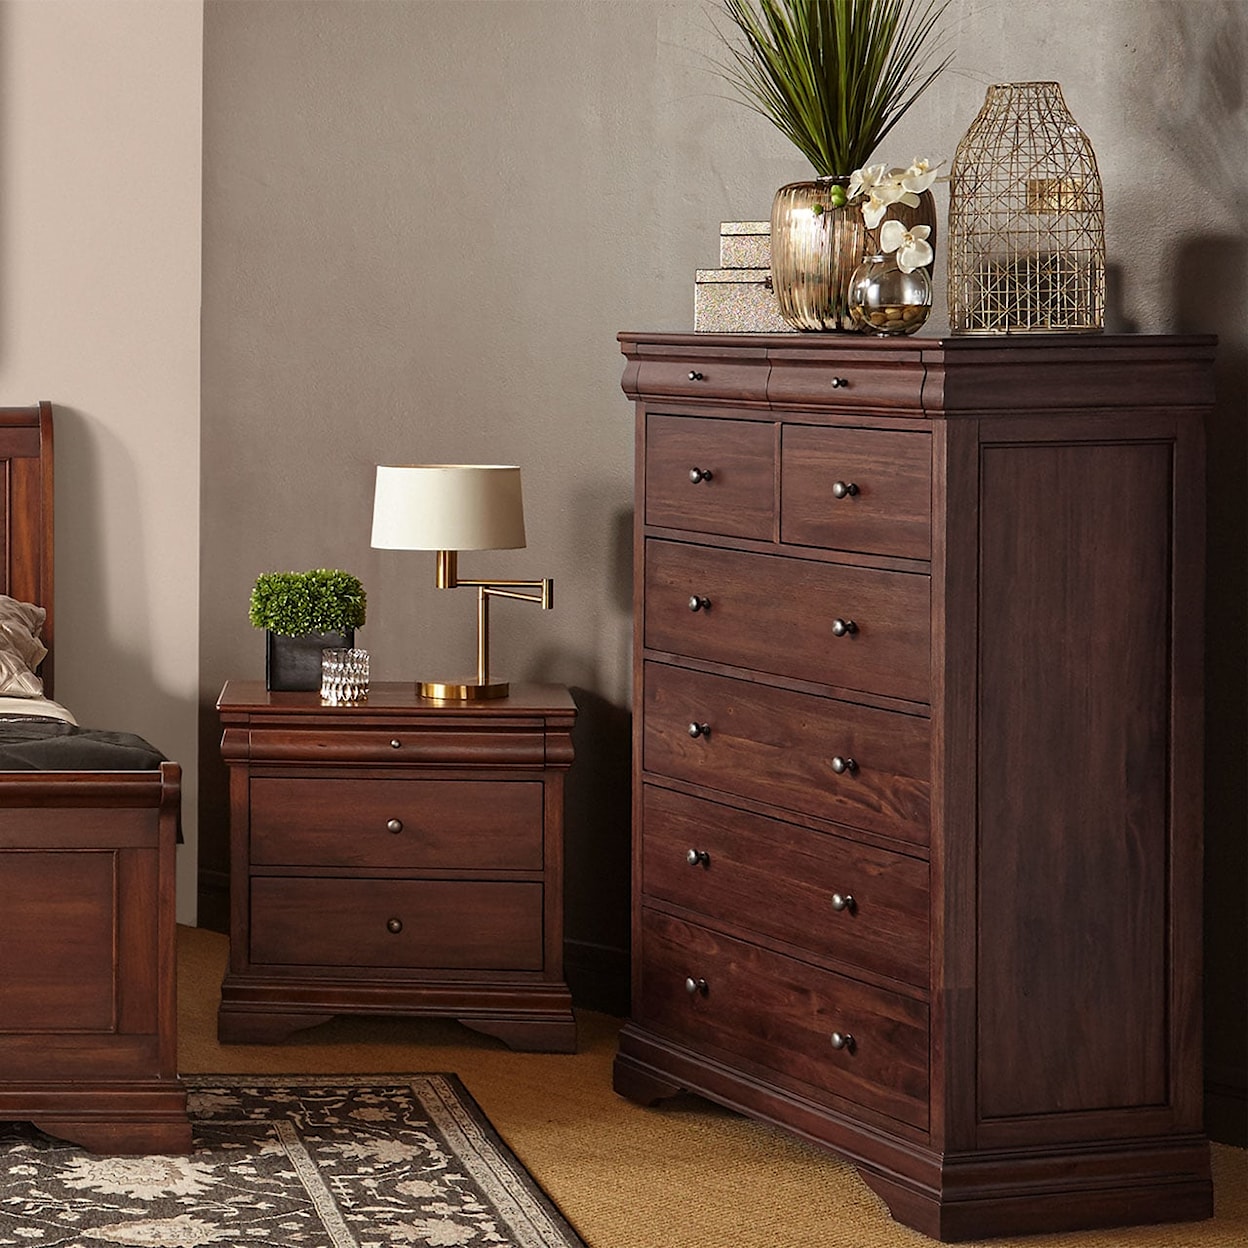 Napa Furniture Design French Classic Chest of Drawers